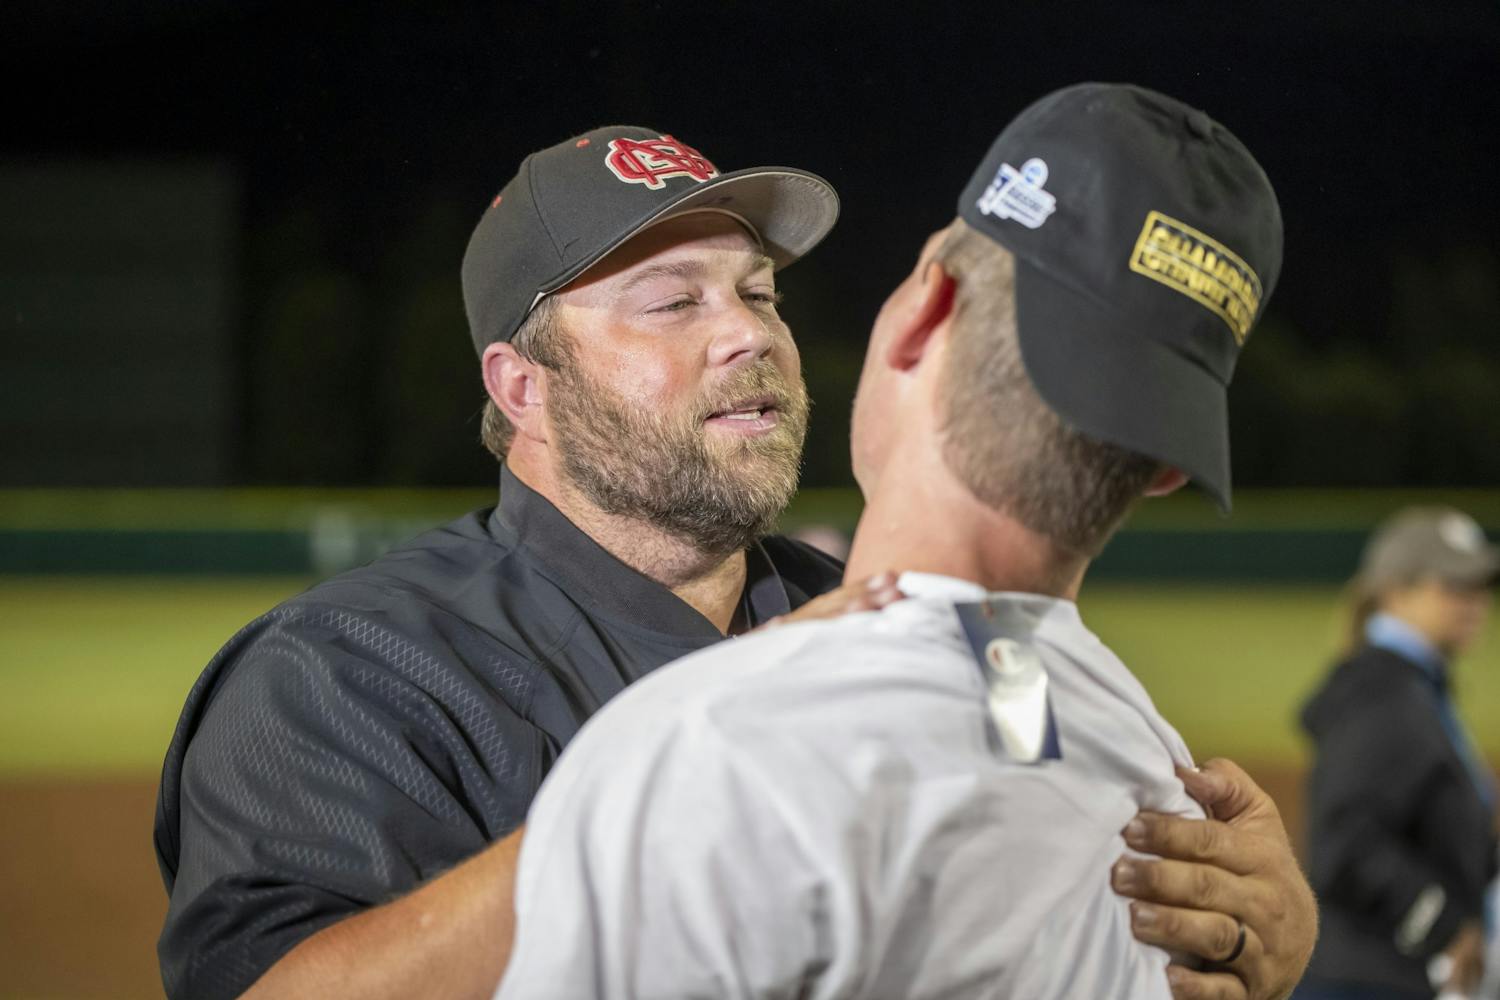 North Greenville head coach Landon Powell celebrates winning the DII baseball national championship with redshirt junior shortstop Cory Bivins on June 10, 2022. North Greenville defeated Point Loma 5-3.